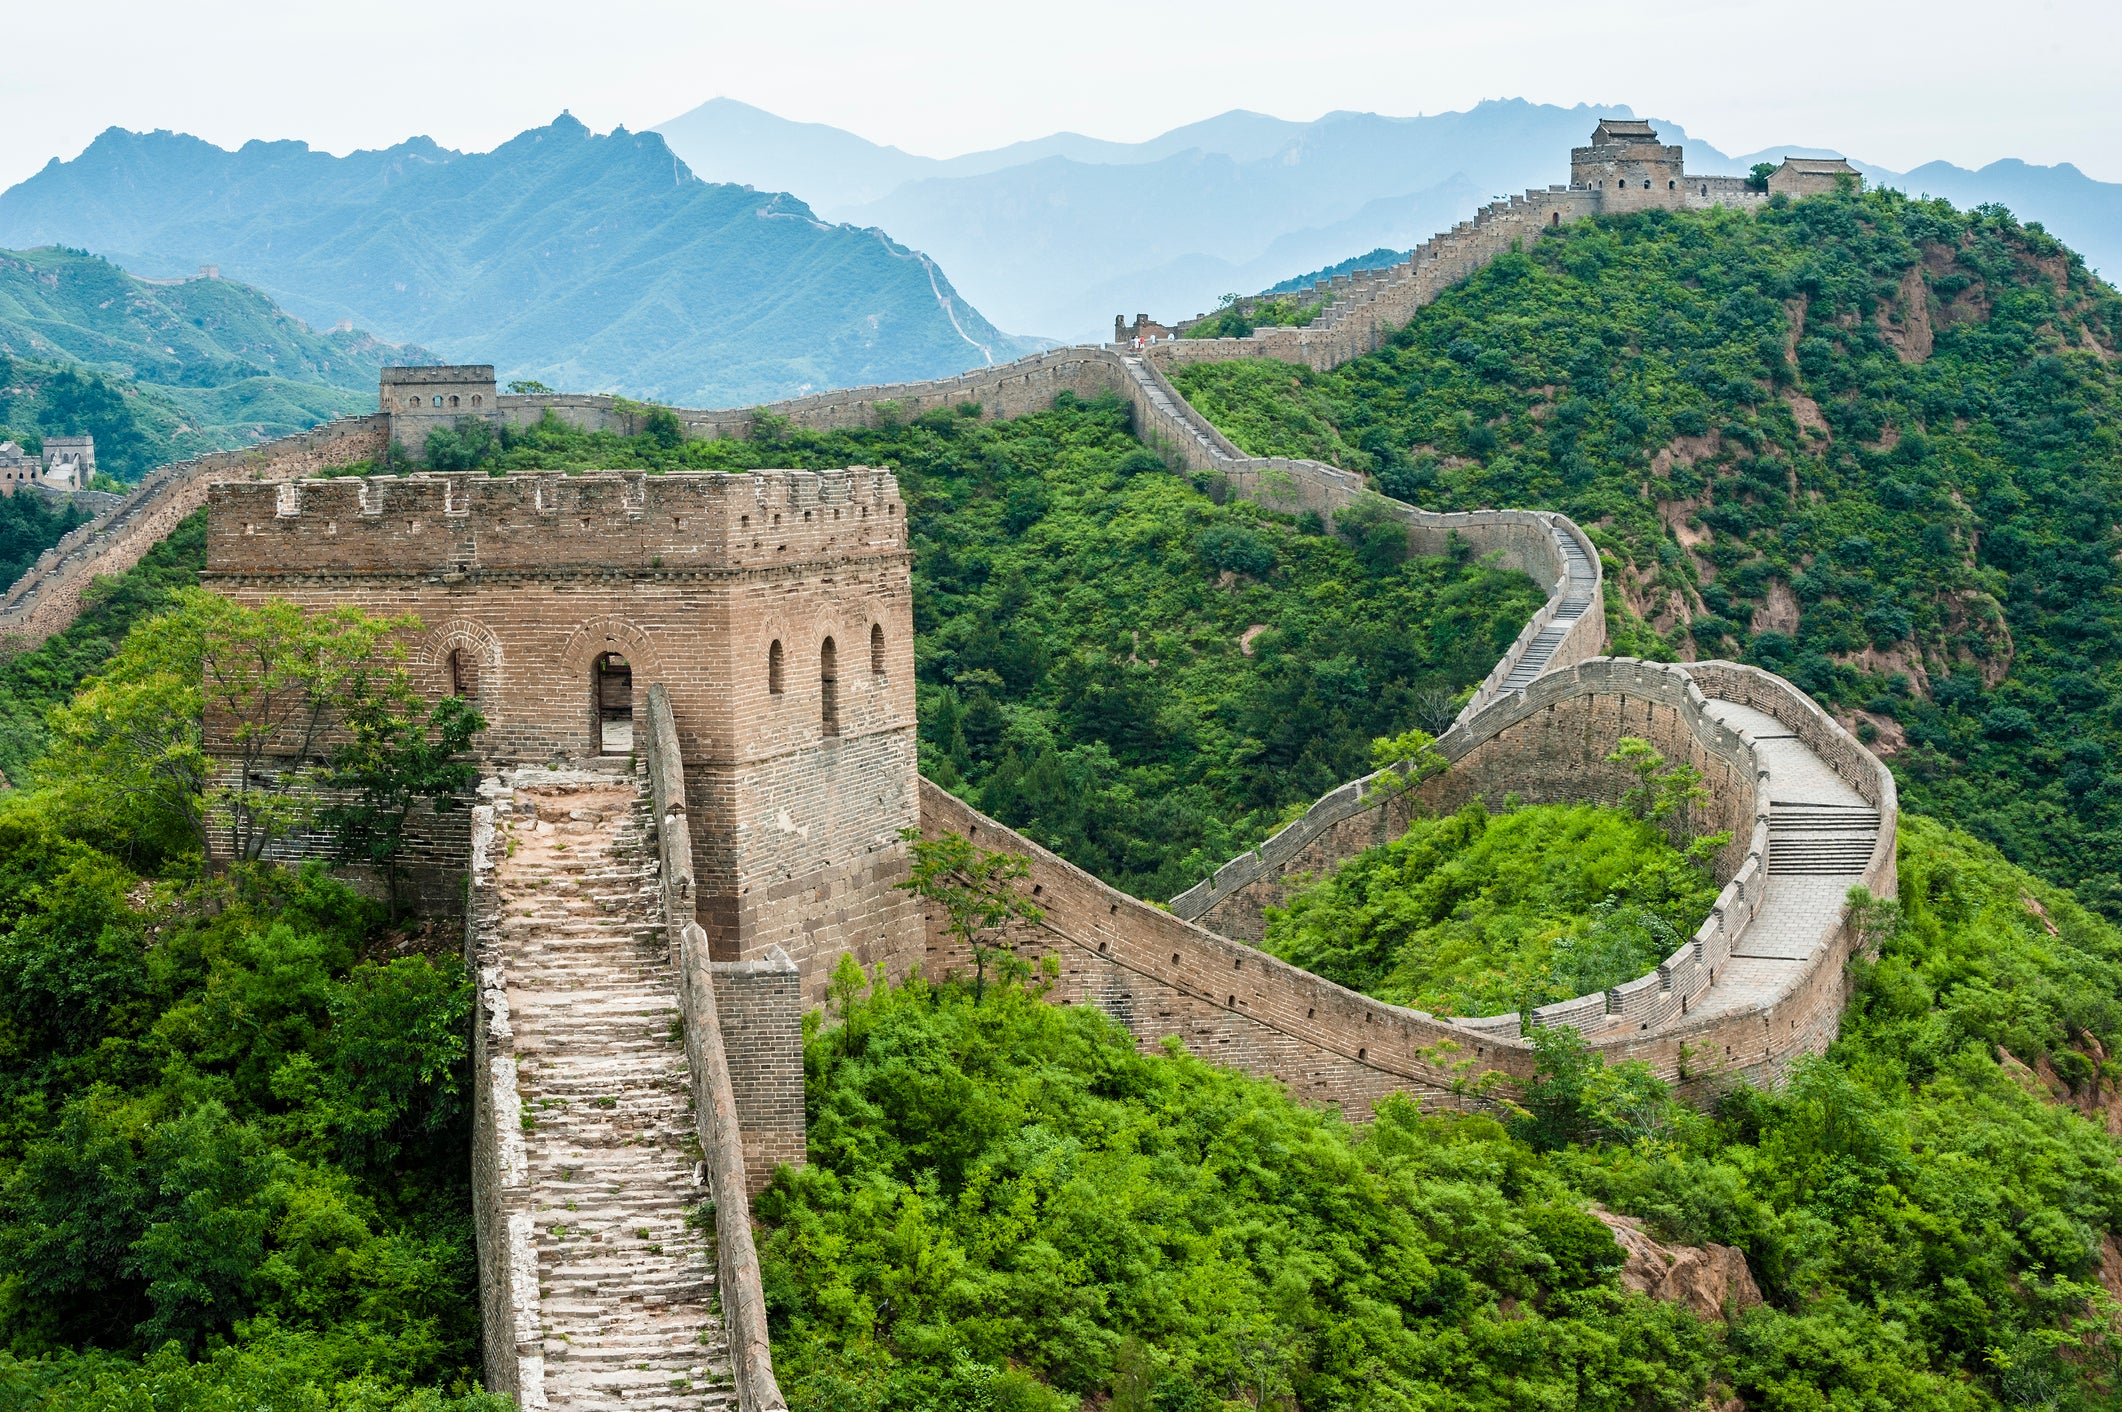 China’s Great Wall is a major draw for tourists to the country